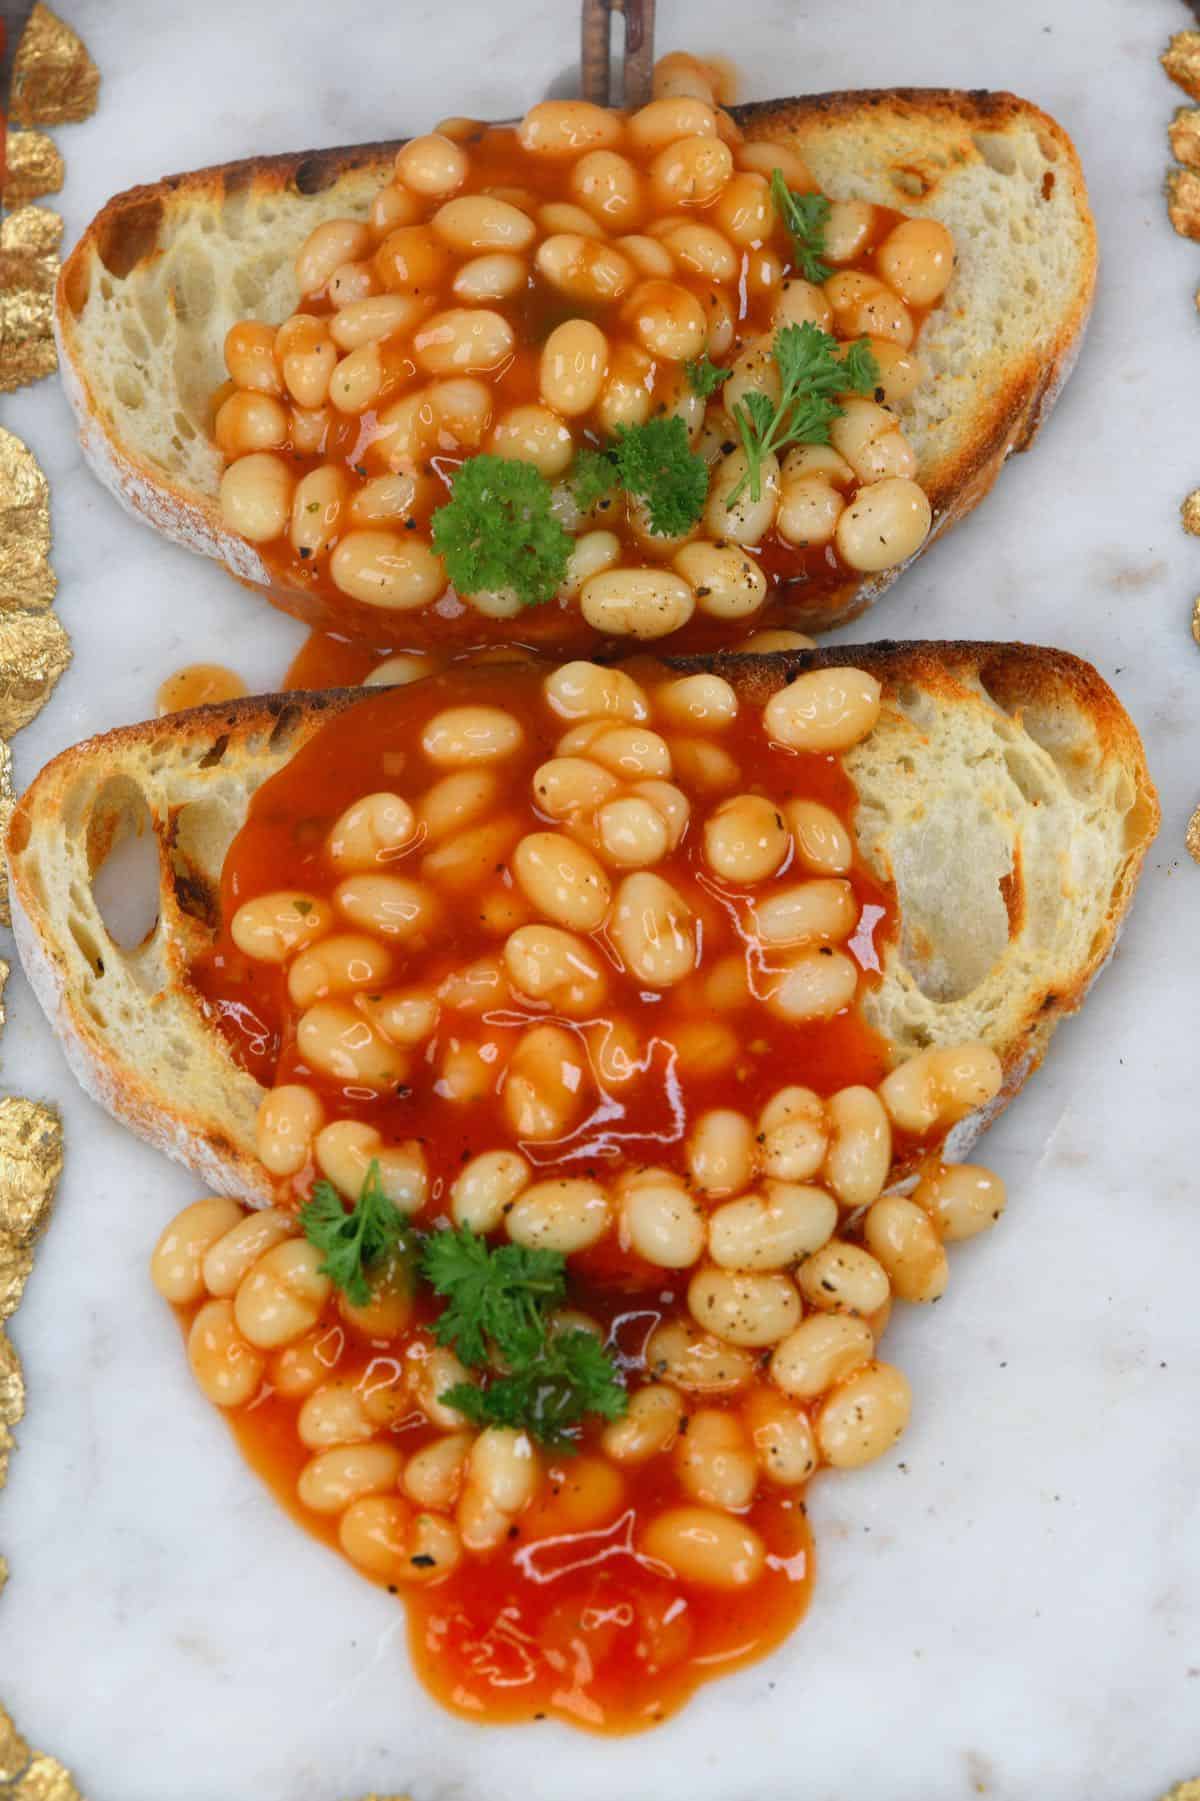 Toast with baked beans